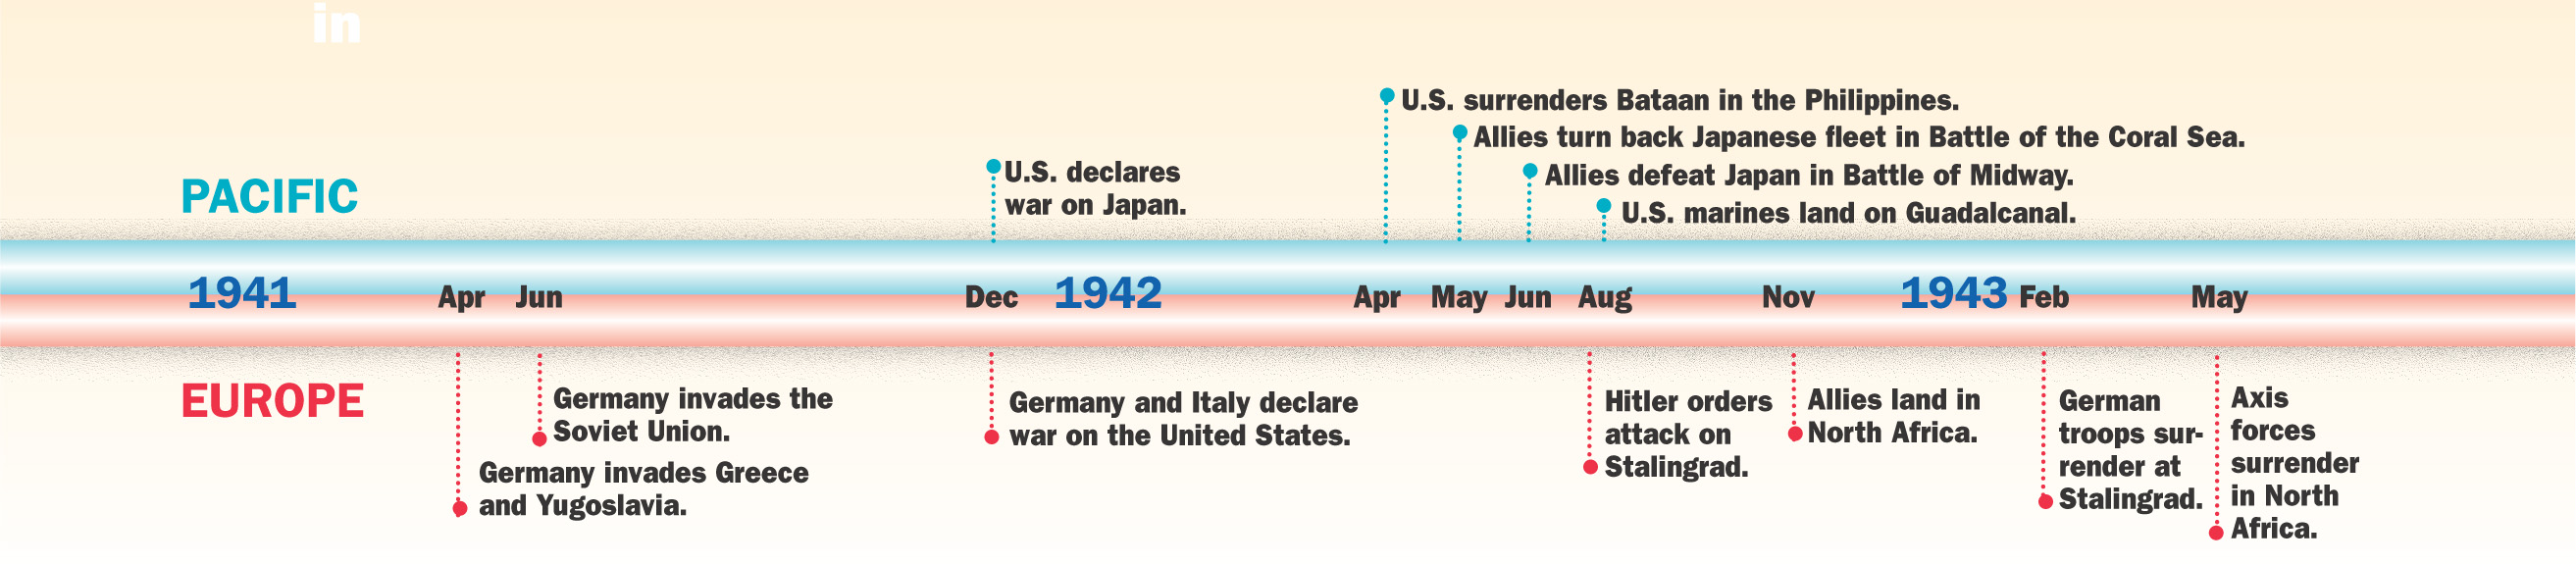 Timeline 1941 - 1943 Pacific and Europe